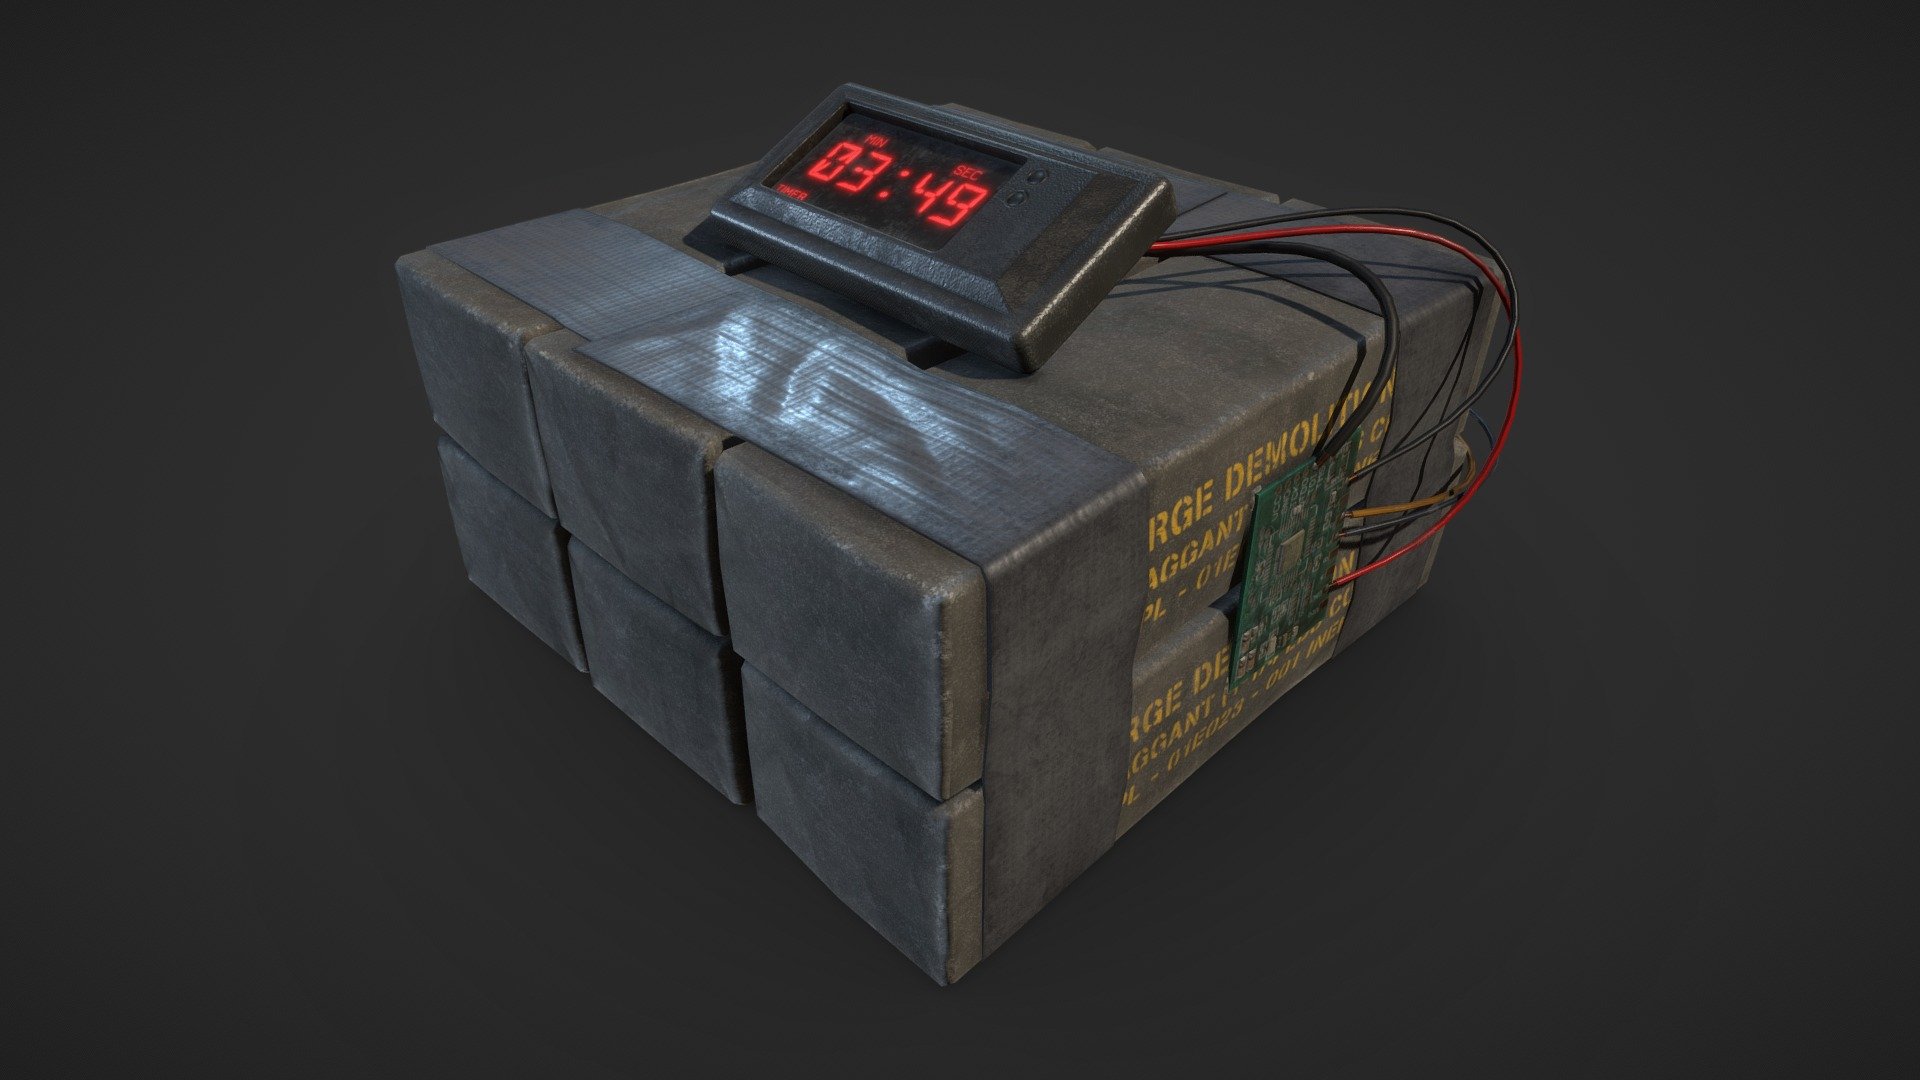 Bomb Asset made in 2 Days from scratch for the Pagan Peak Multiplayer in Unreal Engine 4 - C4 Bomb - 3D model by mmatuszczak 3d model